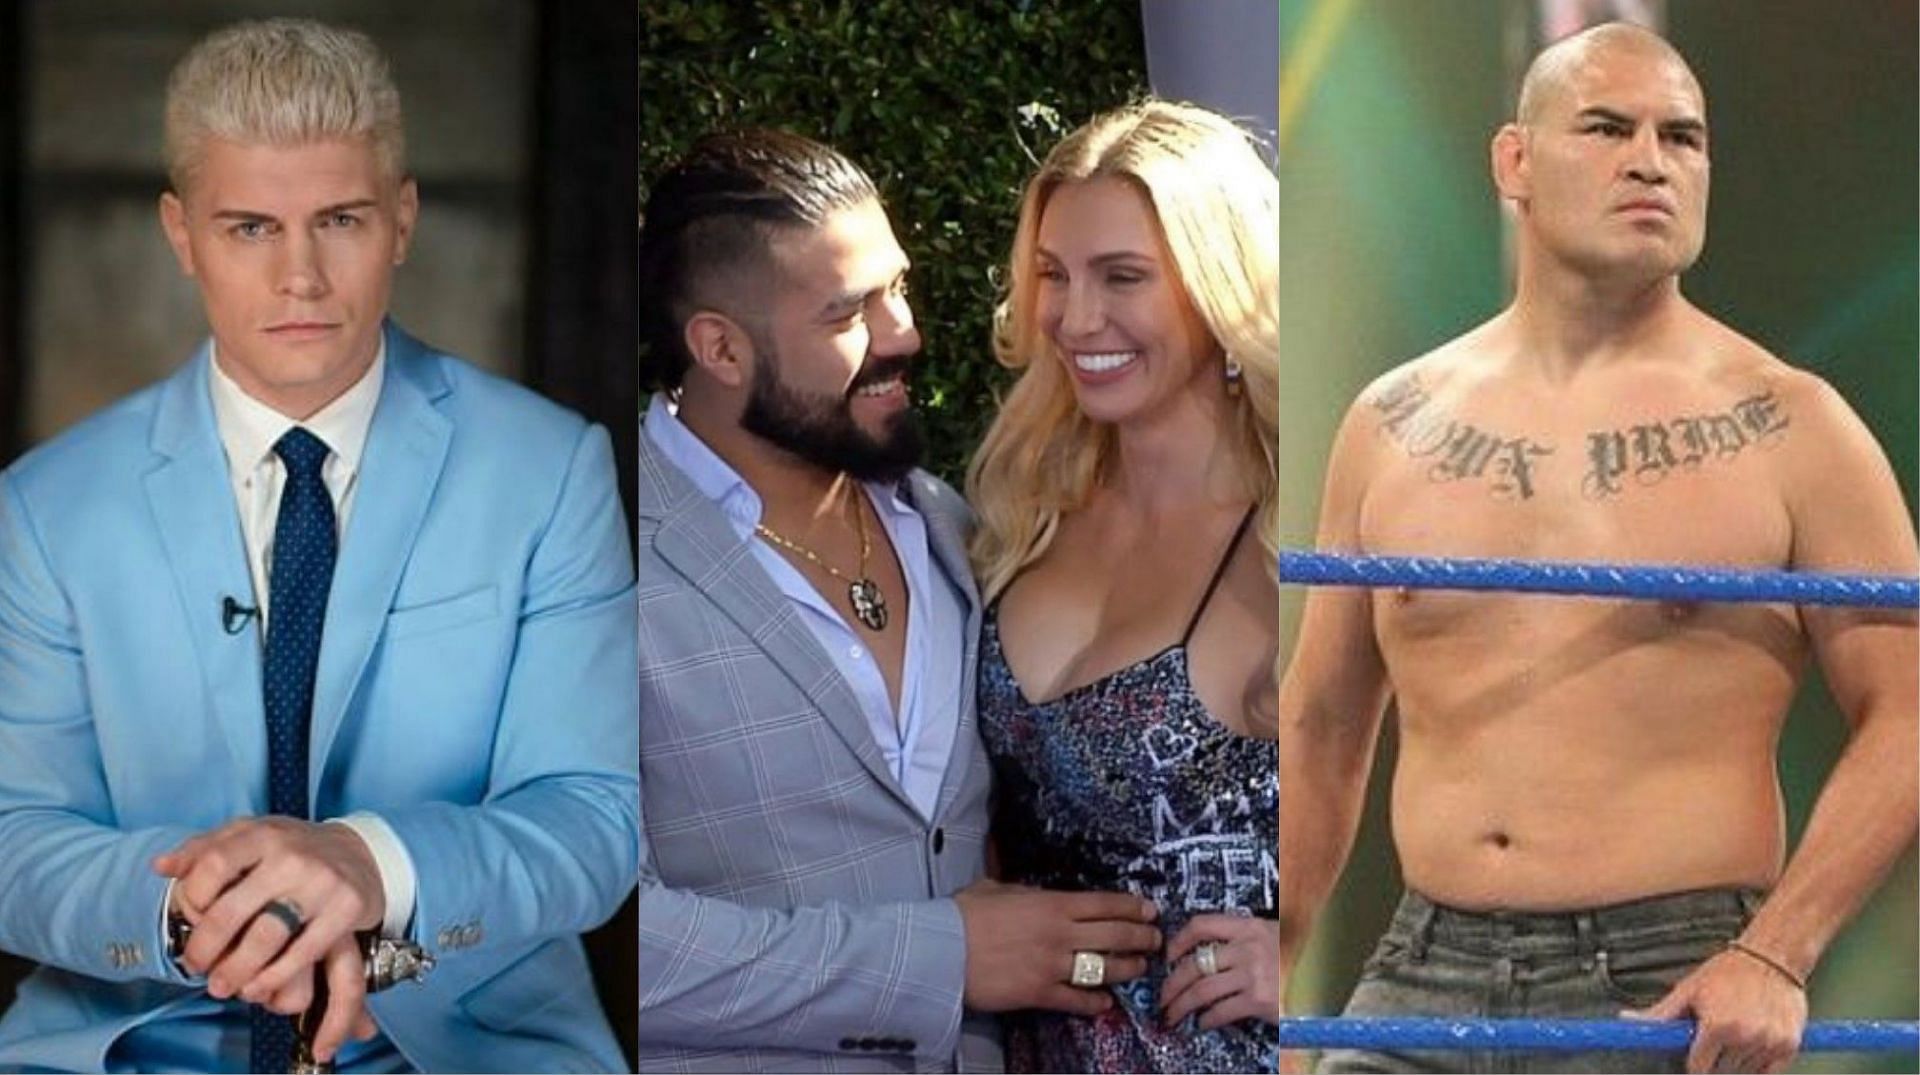 <div></noscript>4 AEW rumors we hope are true and 1 we hope aren't: Former UFC Champion was set to confront Cain Velasquez, interesting detail on how Andrade-Charlotte Flair's relationship ended, Cody Rhodes' health update</div>